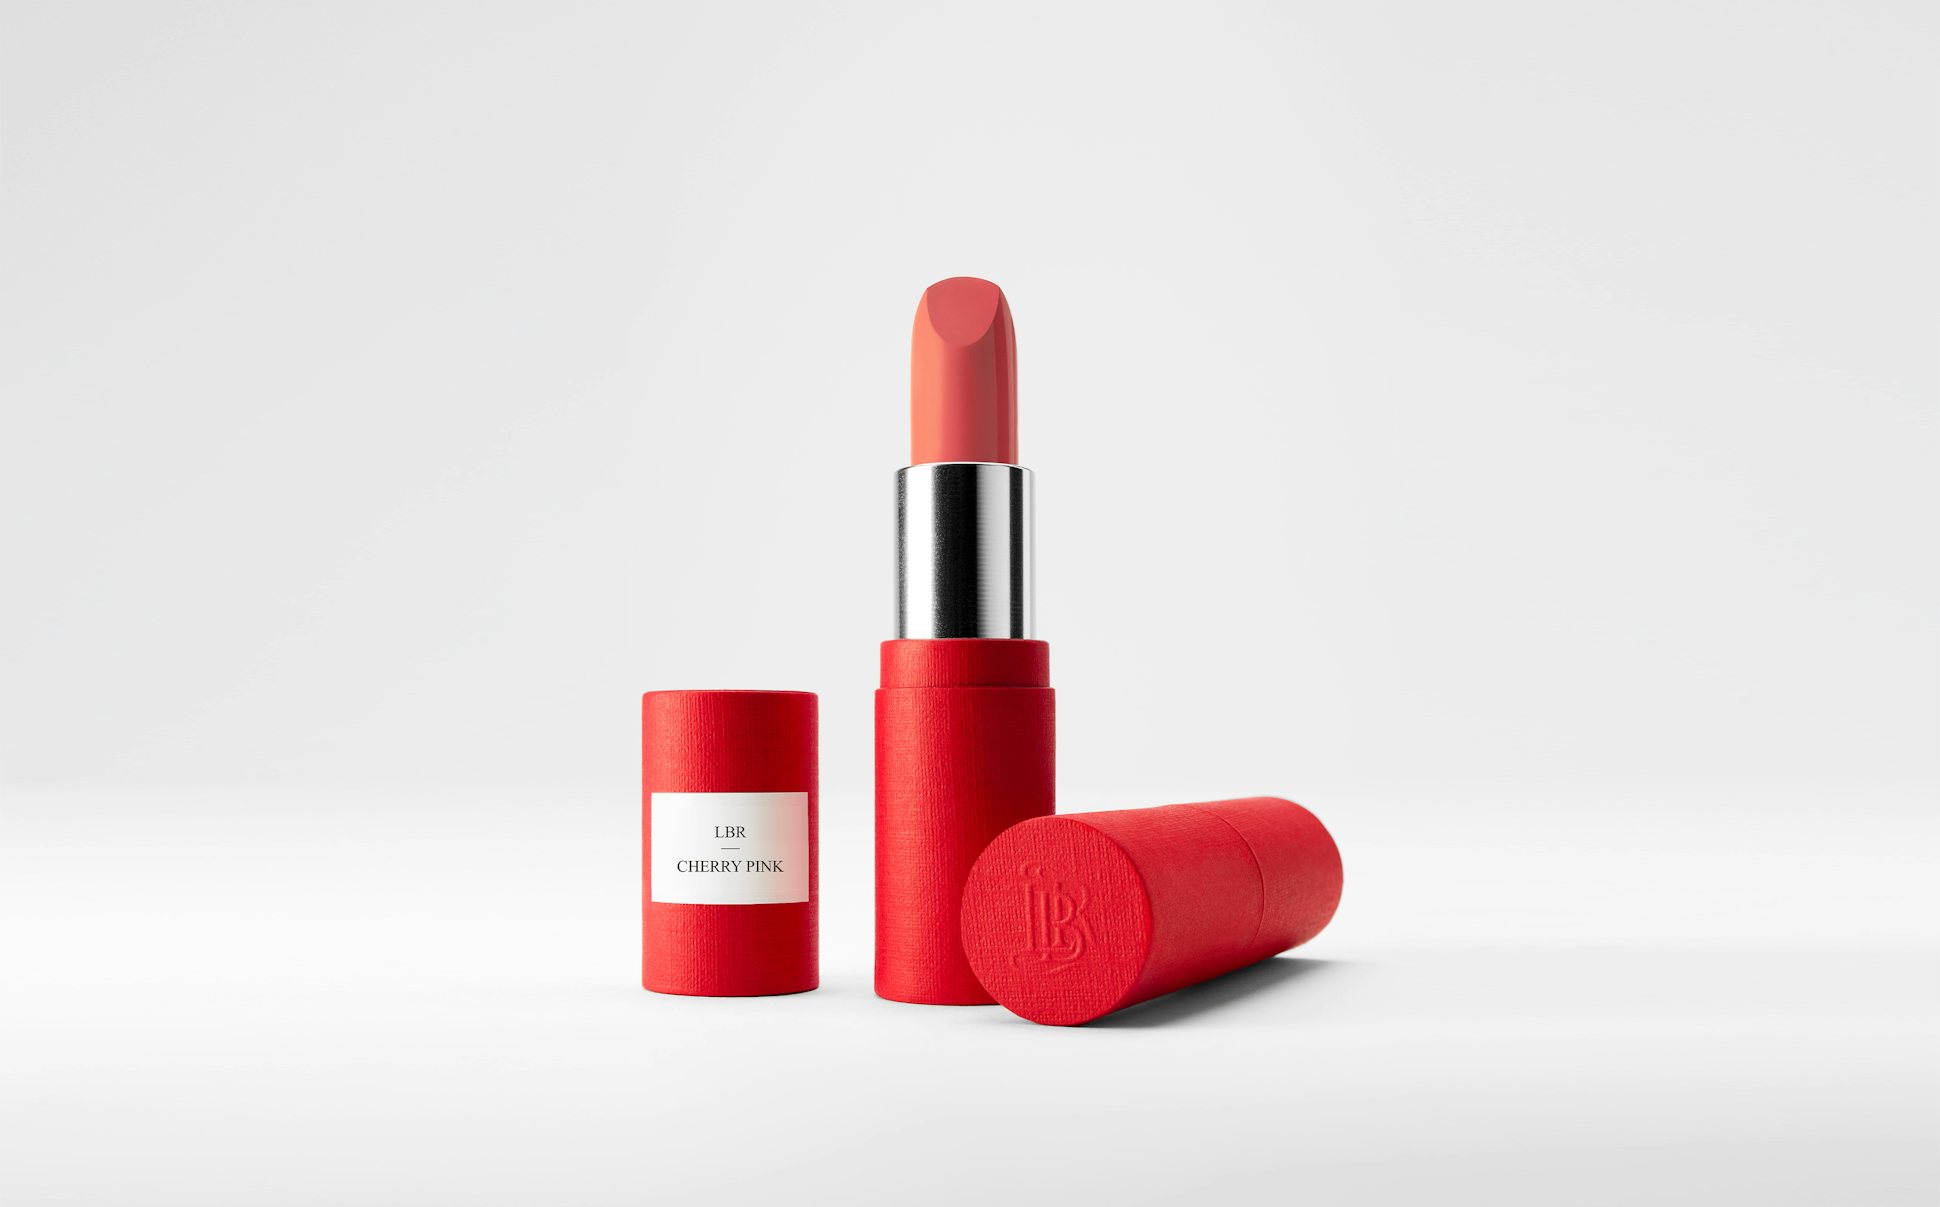 La bouche rouge Cherry Pink lipstick in the red paper case